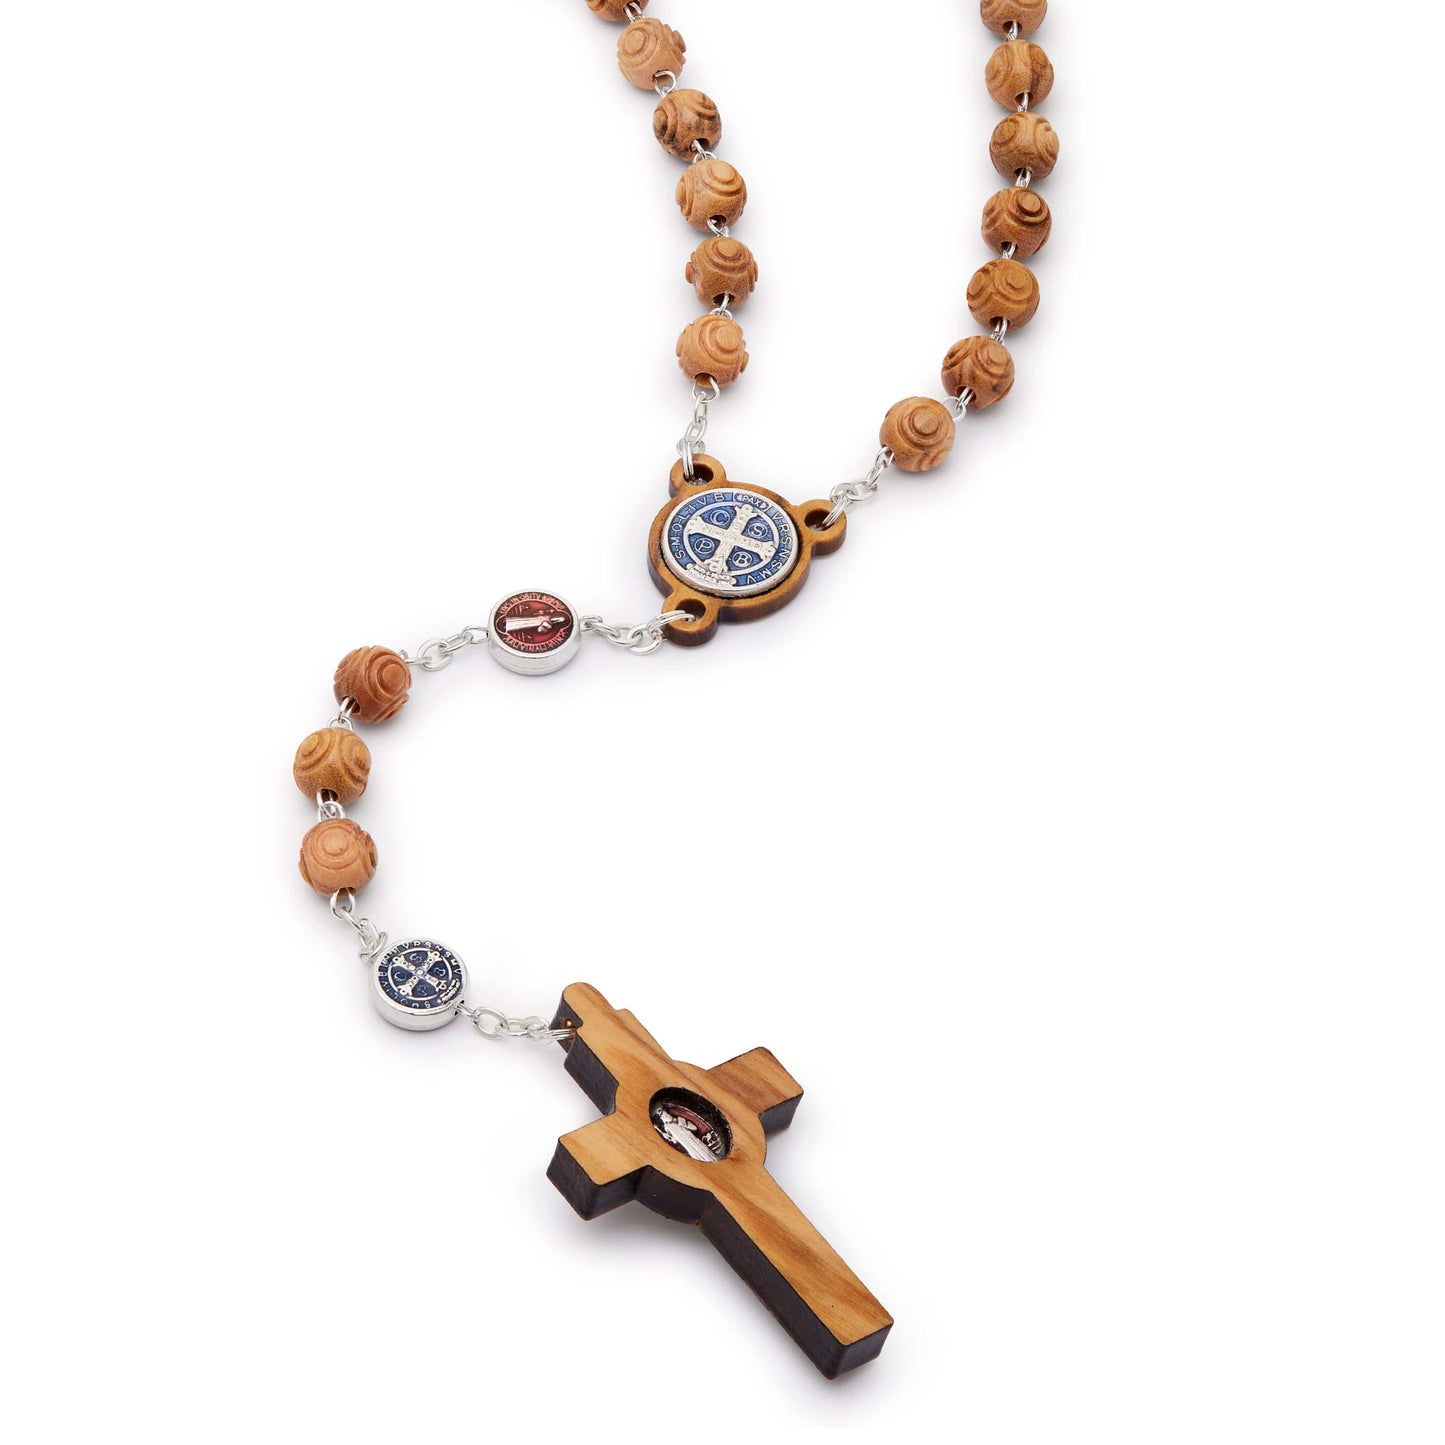 MONDO CATTOLICO Prayer Beads 54 cm (21.25 in) / 7 mm (0.27 in) St. Benedict Rosary Beads in Olive Wood